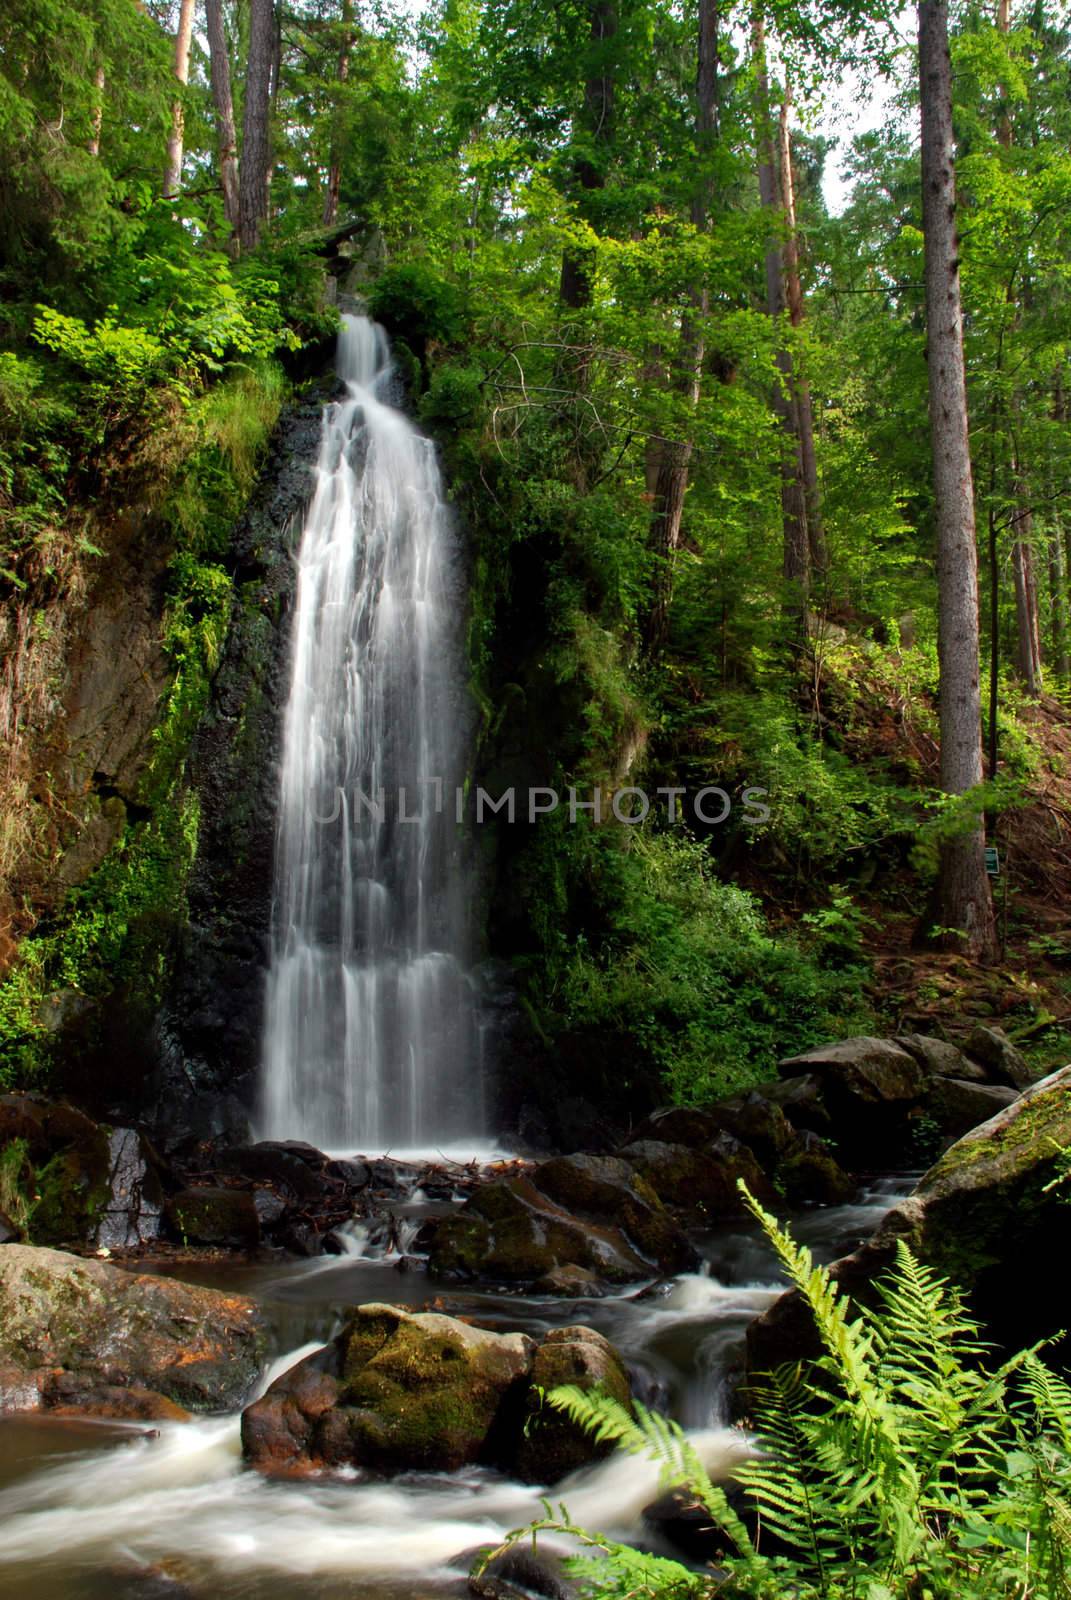 Waterfall in the forest with a long exposure